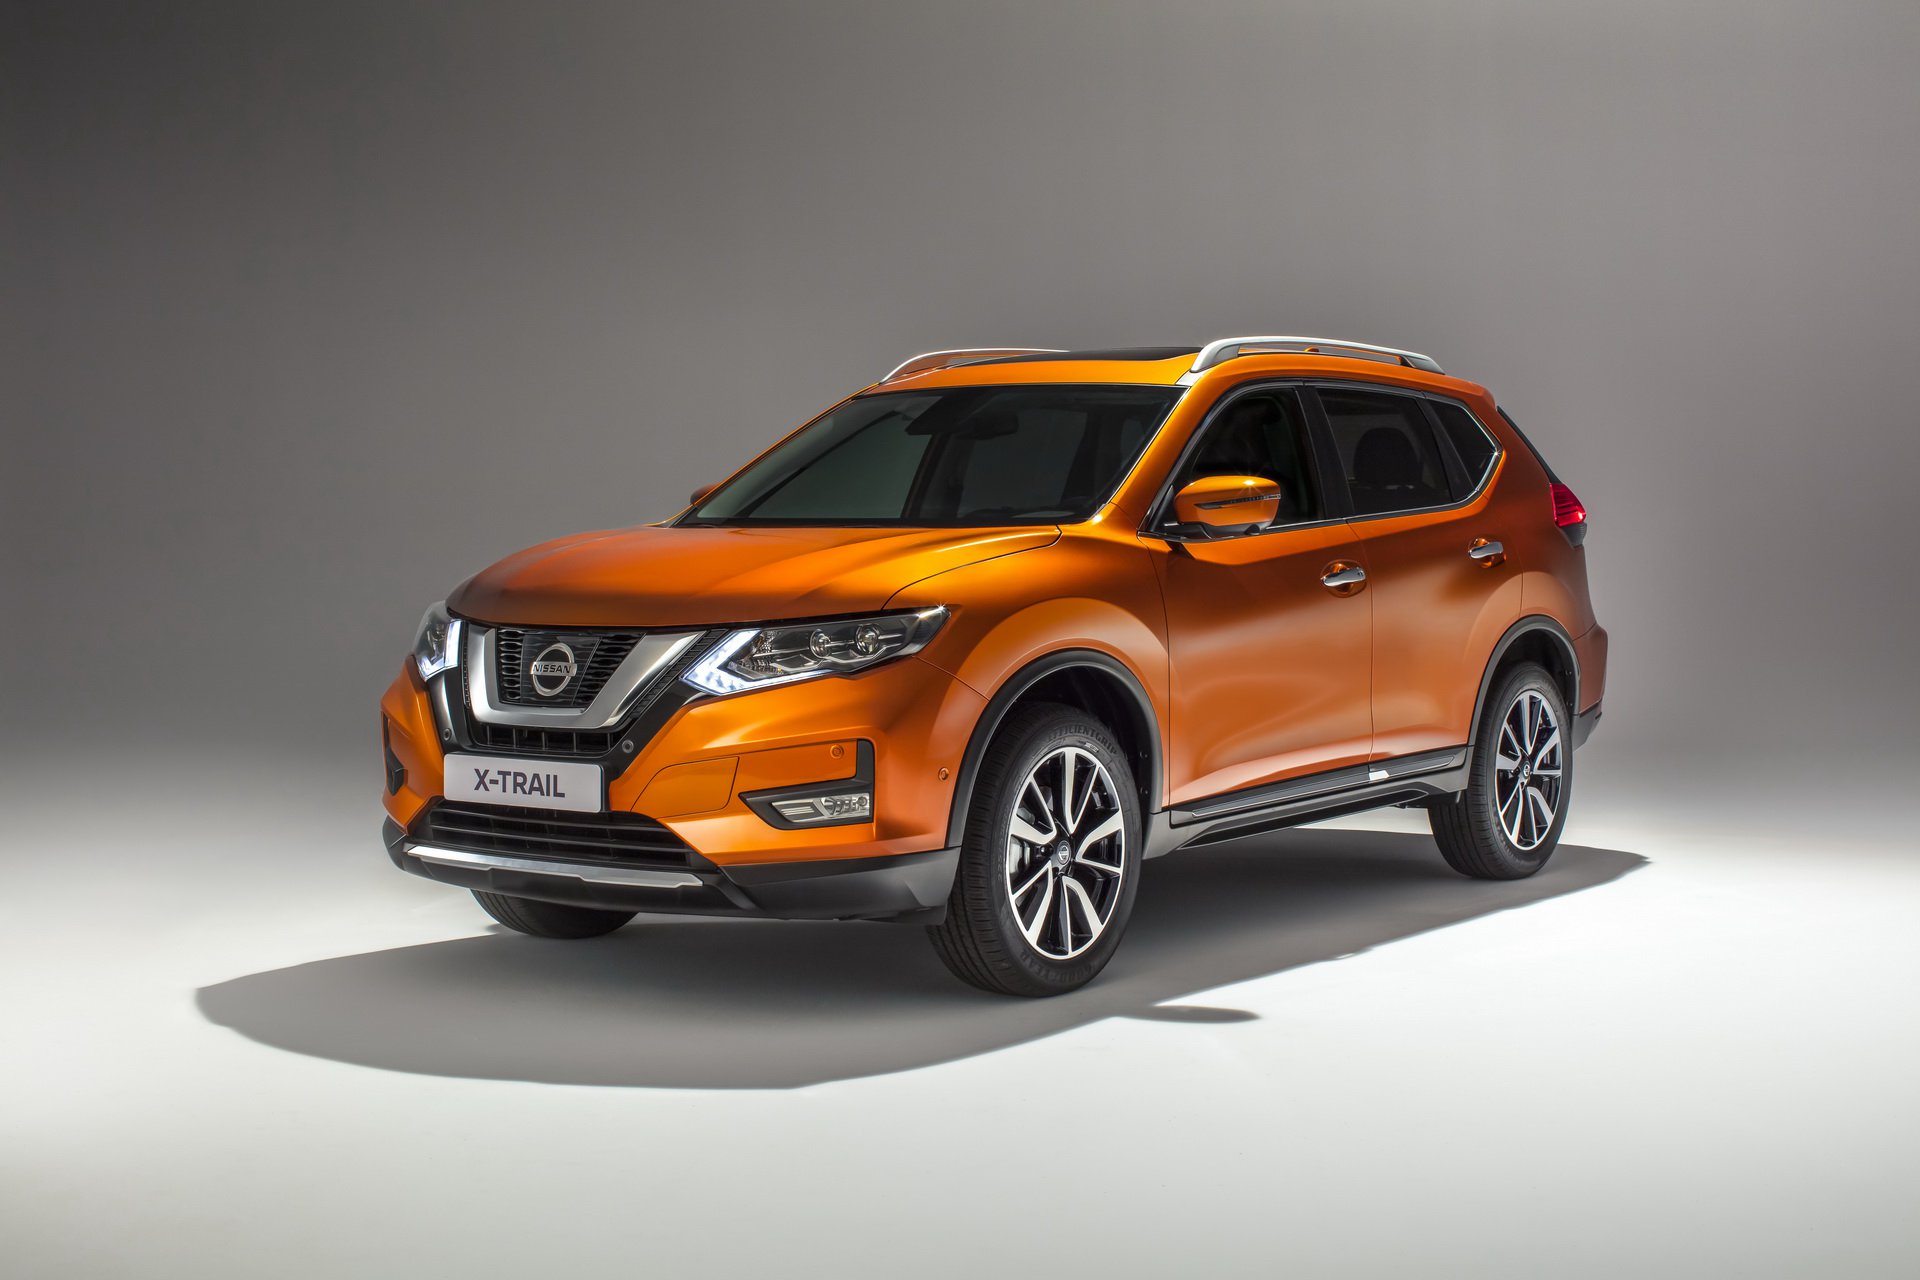 2019 Nissan X-Trail Gets 1.7-Liter Diesel With 150 HP, 1.3 Turbo With 160  HP - autoevolution